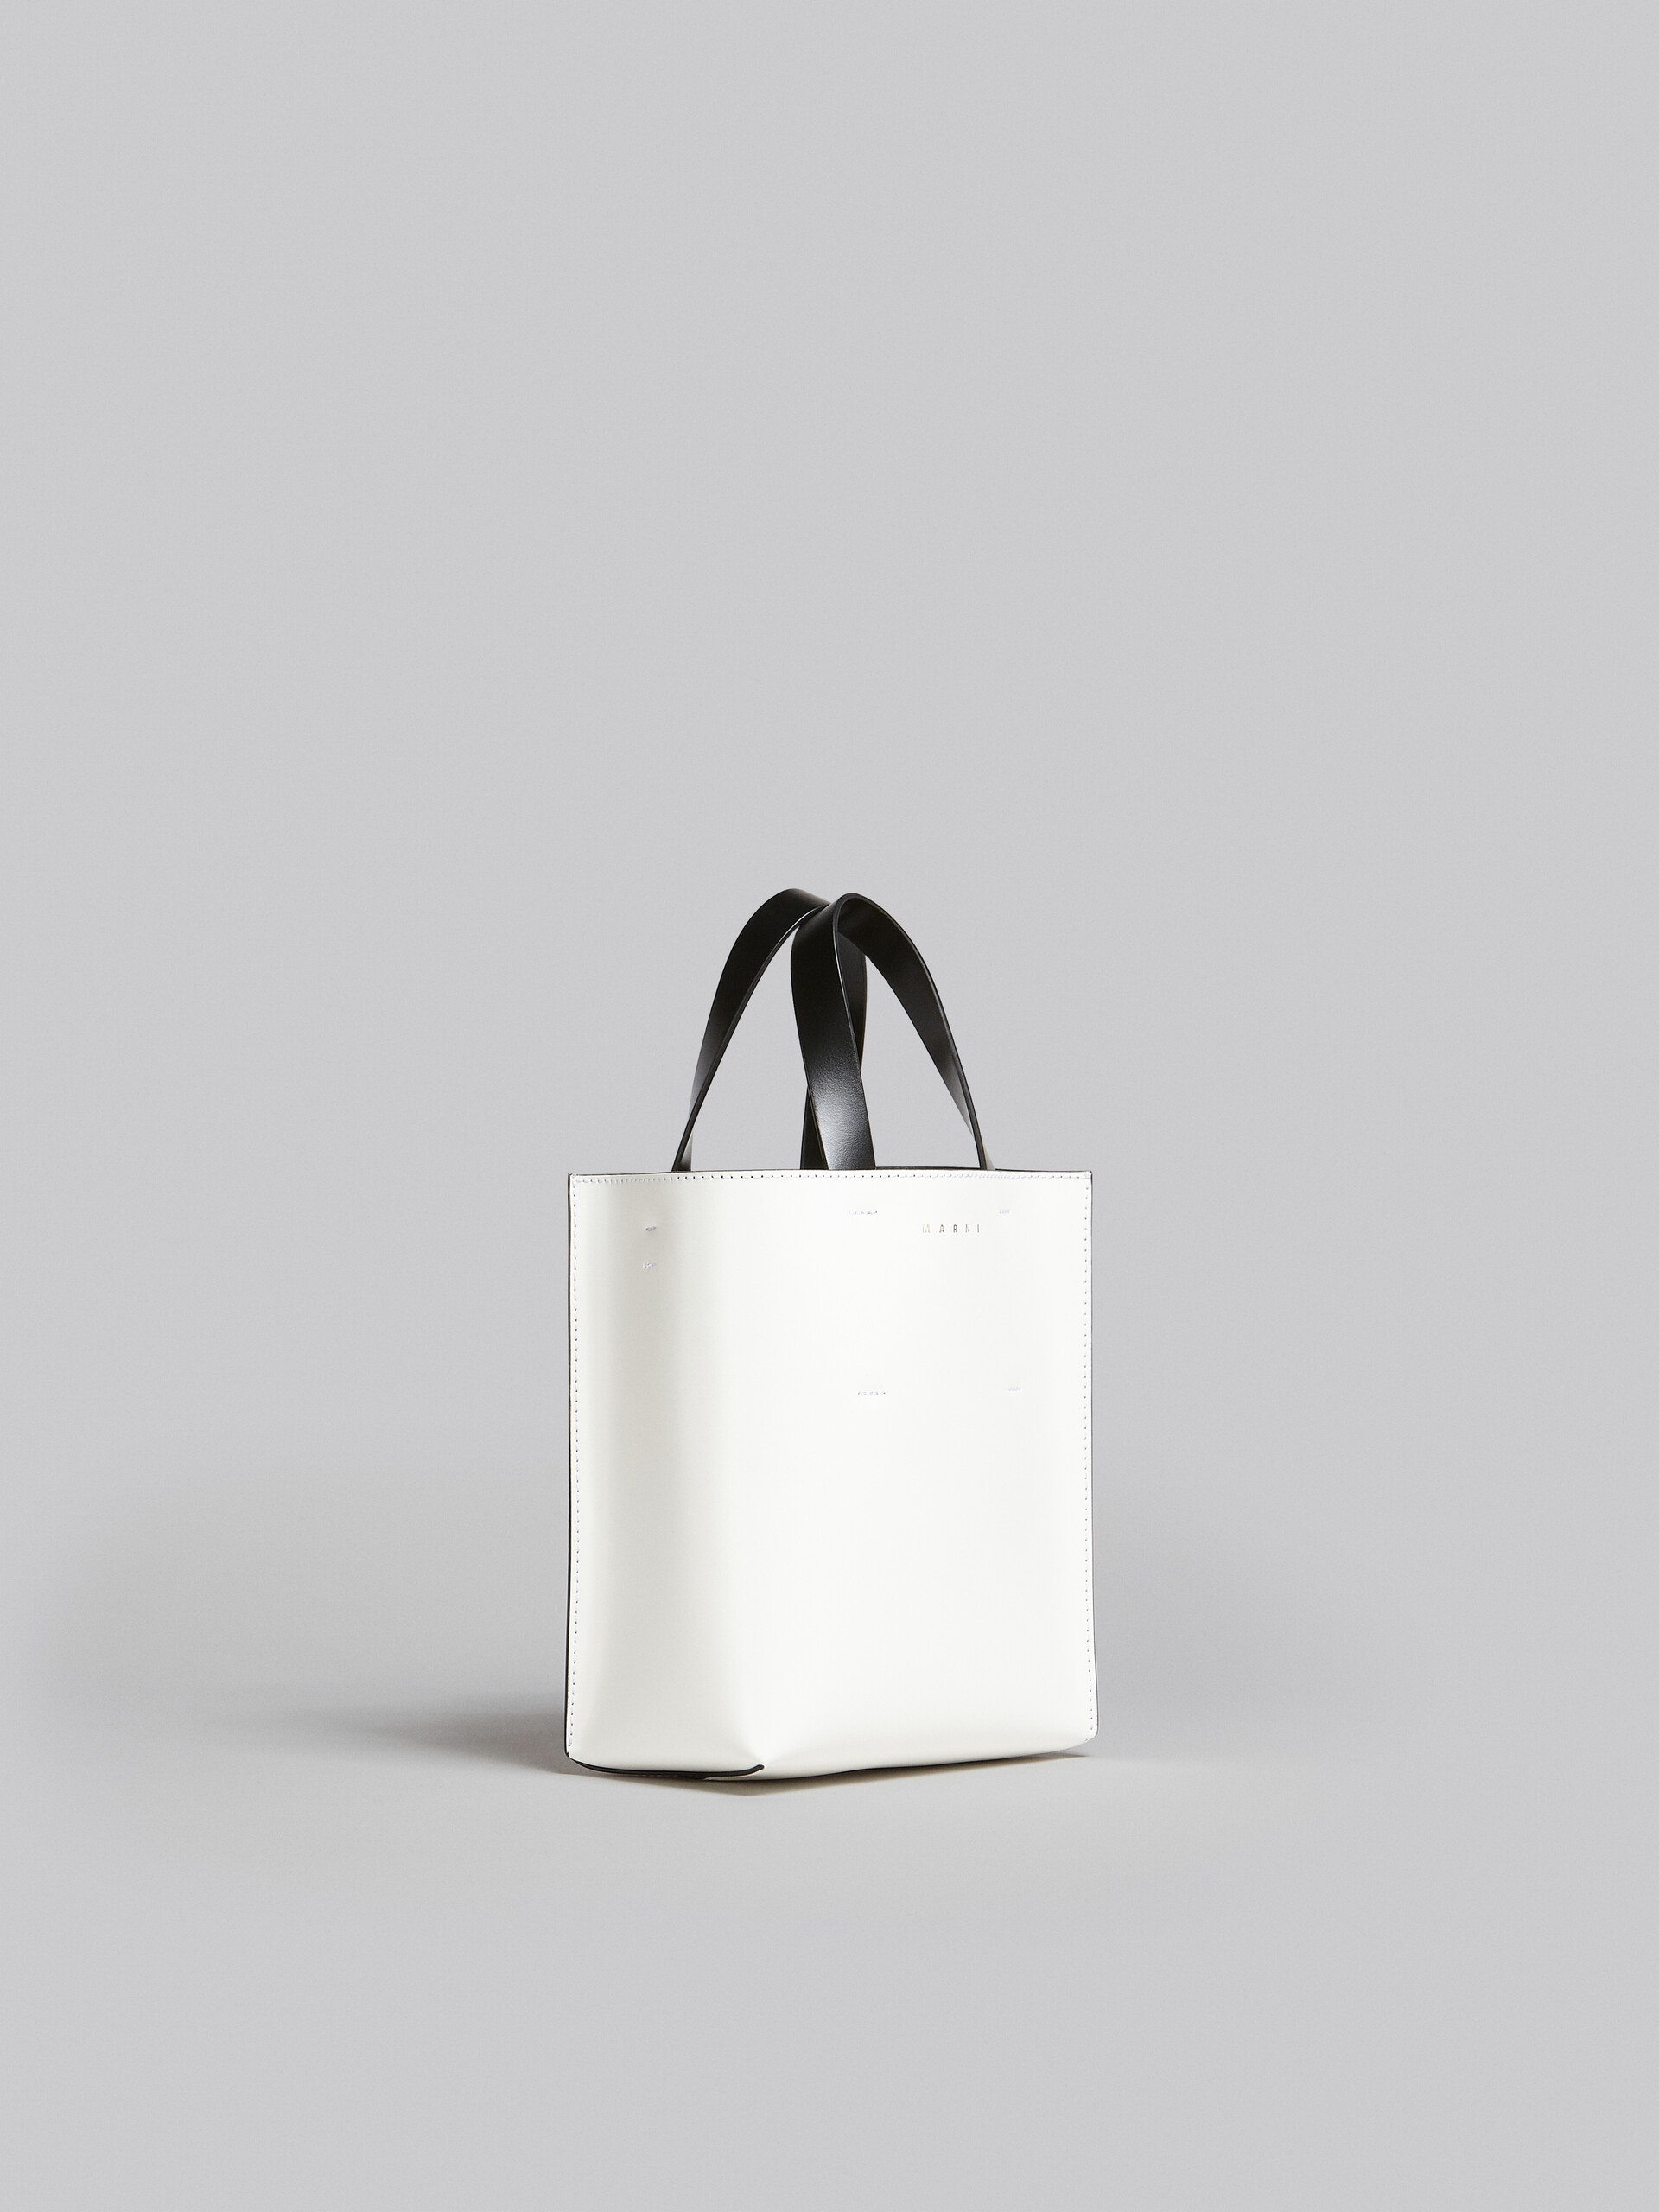 Museo Mini Bag in pink white and black leather - Shopping Bags - Image 6